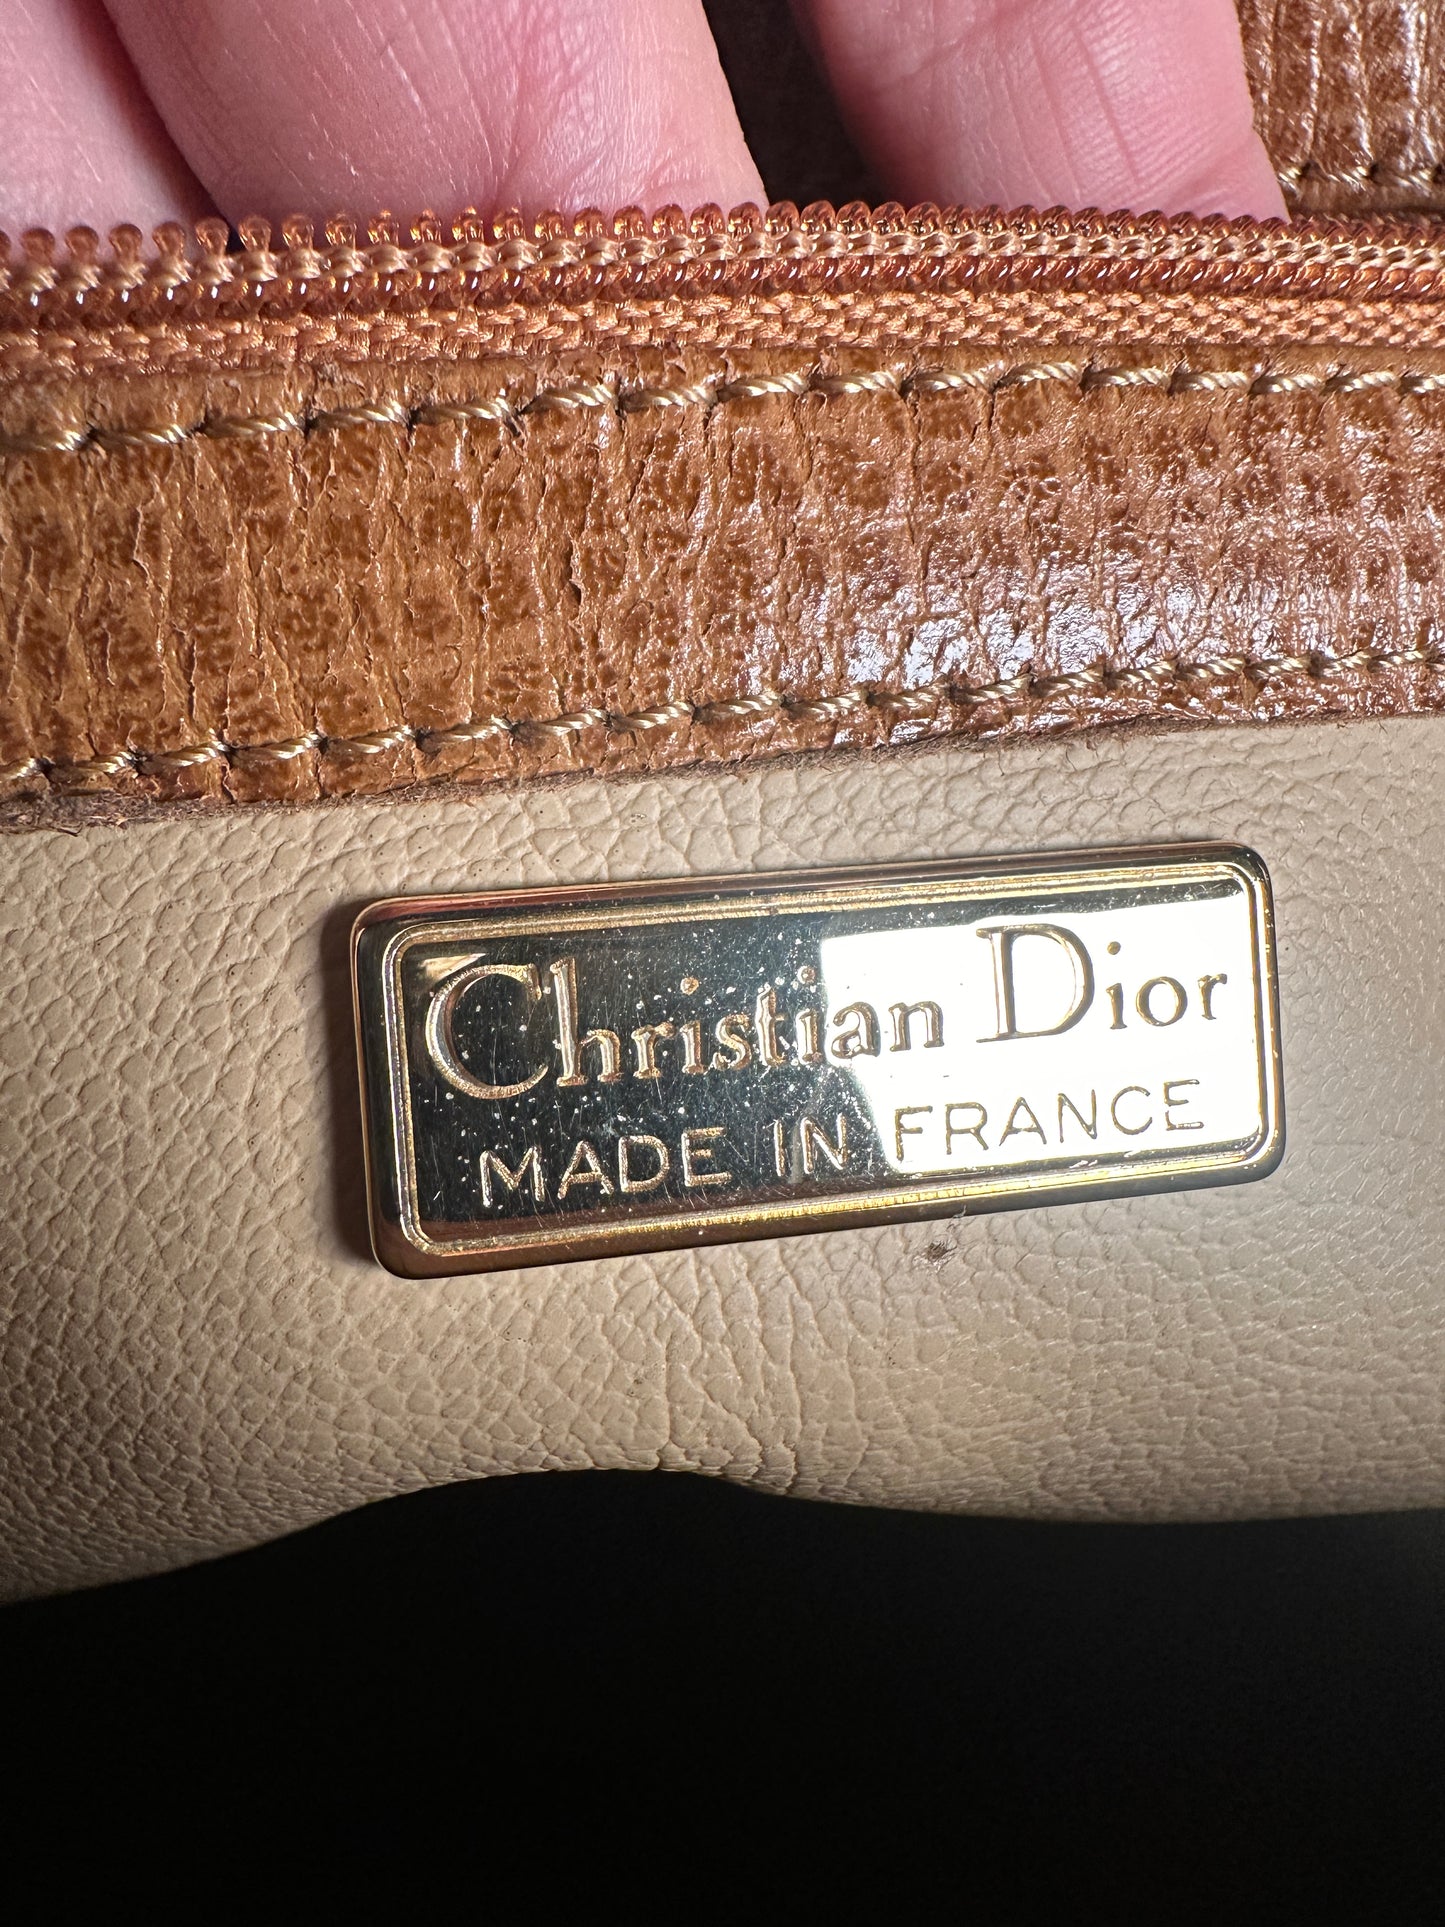 CHRISTIAN DIOR VINTAGE 100% Authentic Genuine Leather Drawstring Backpack, Yellow, 2000's, Great Condition, Rare